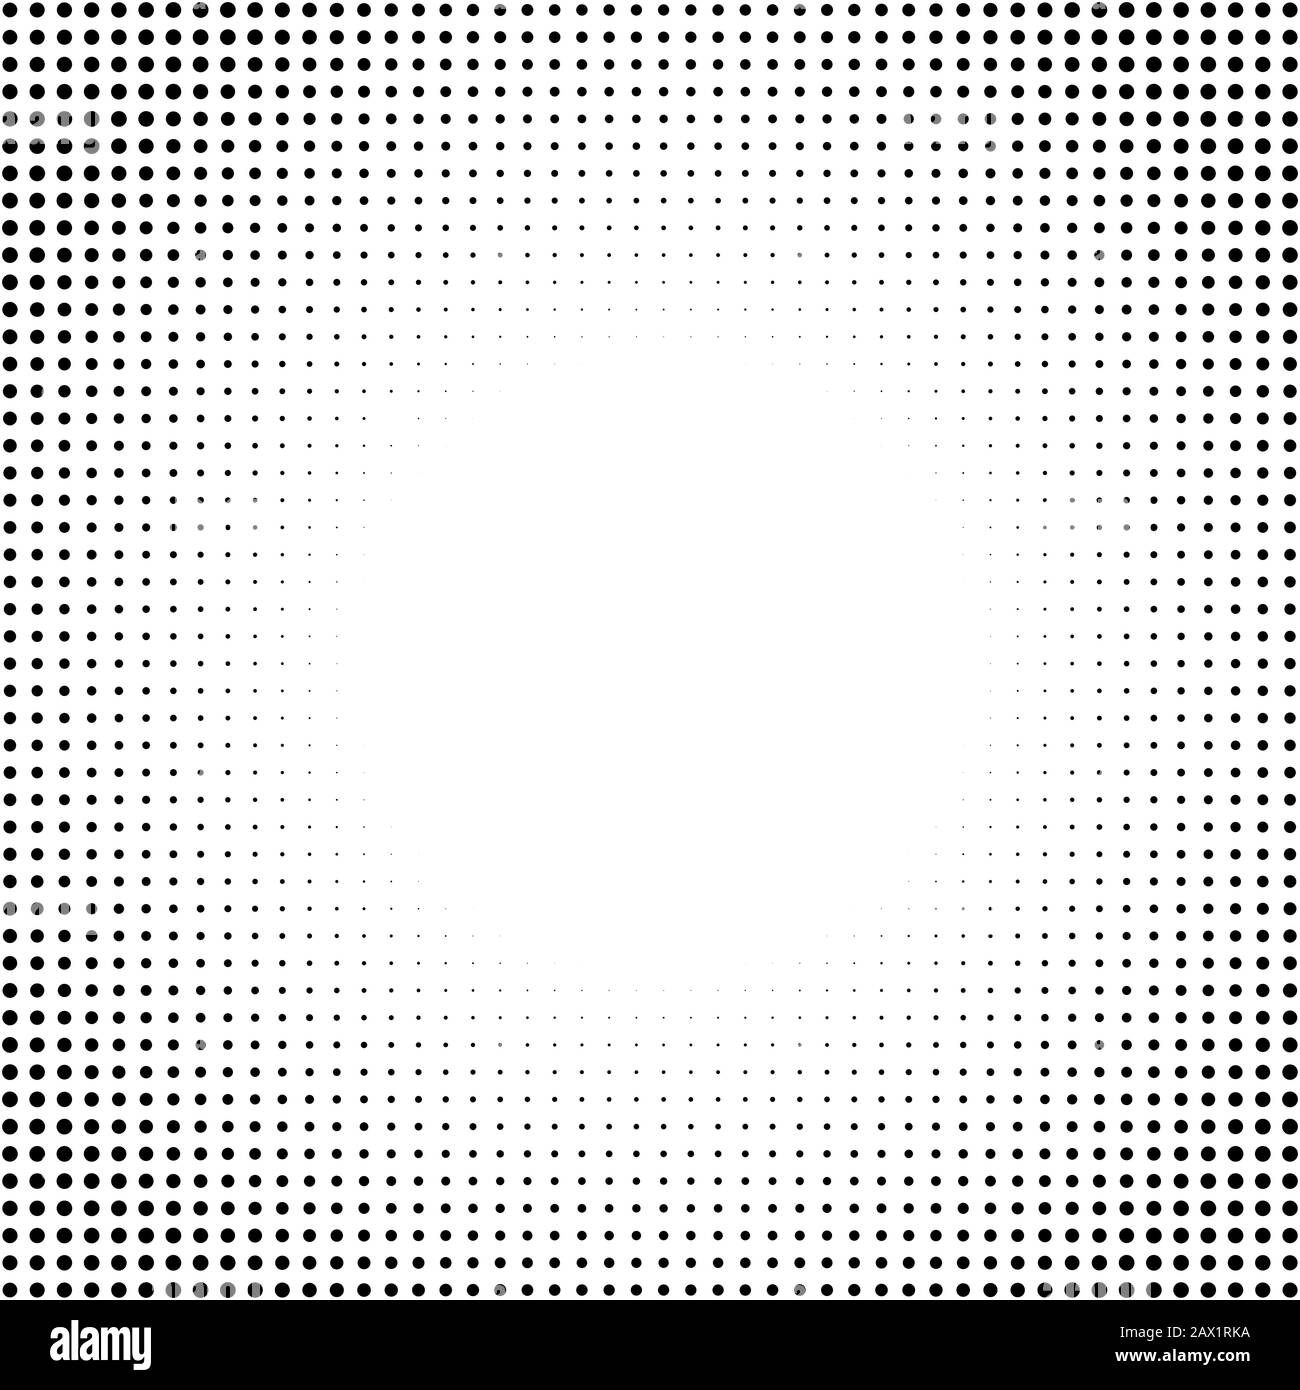 Dotted halftone vector abstract background. Round monochrome textured frame Stock Vector